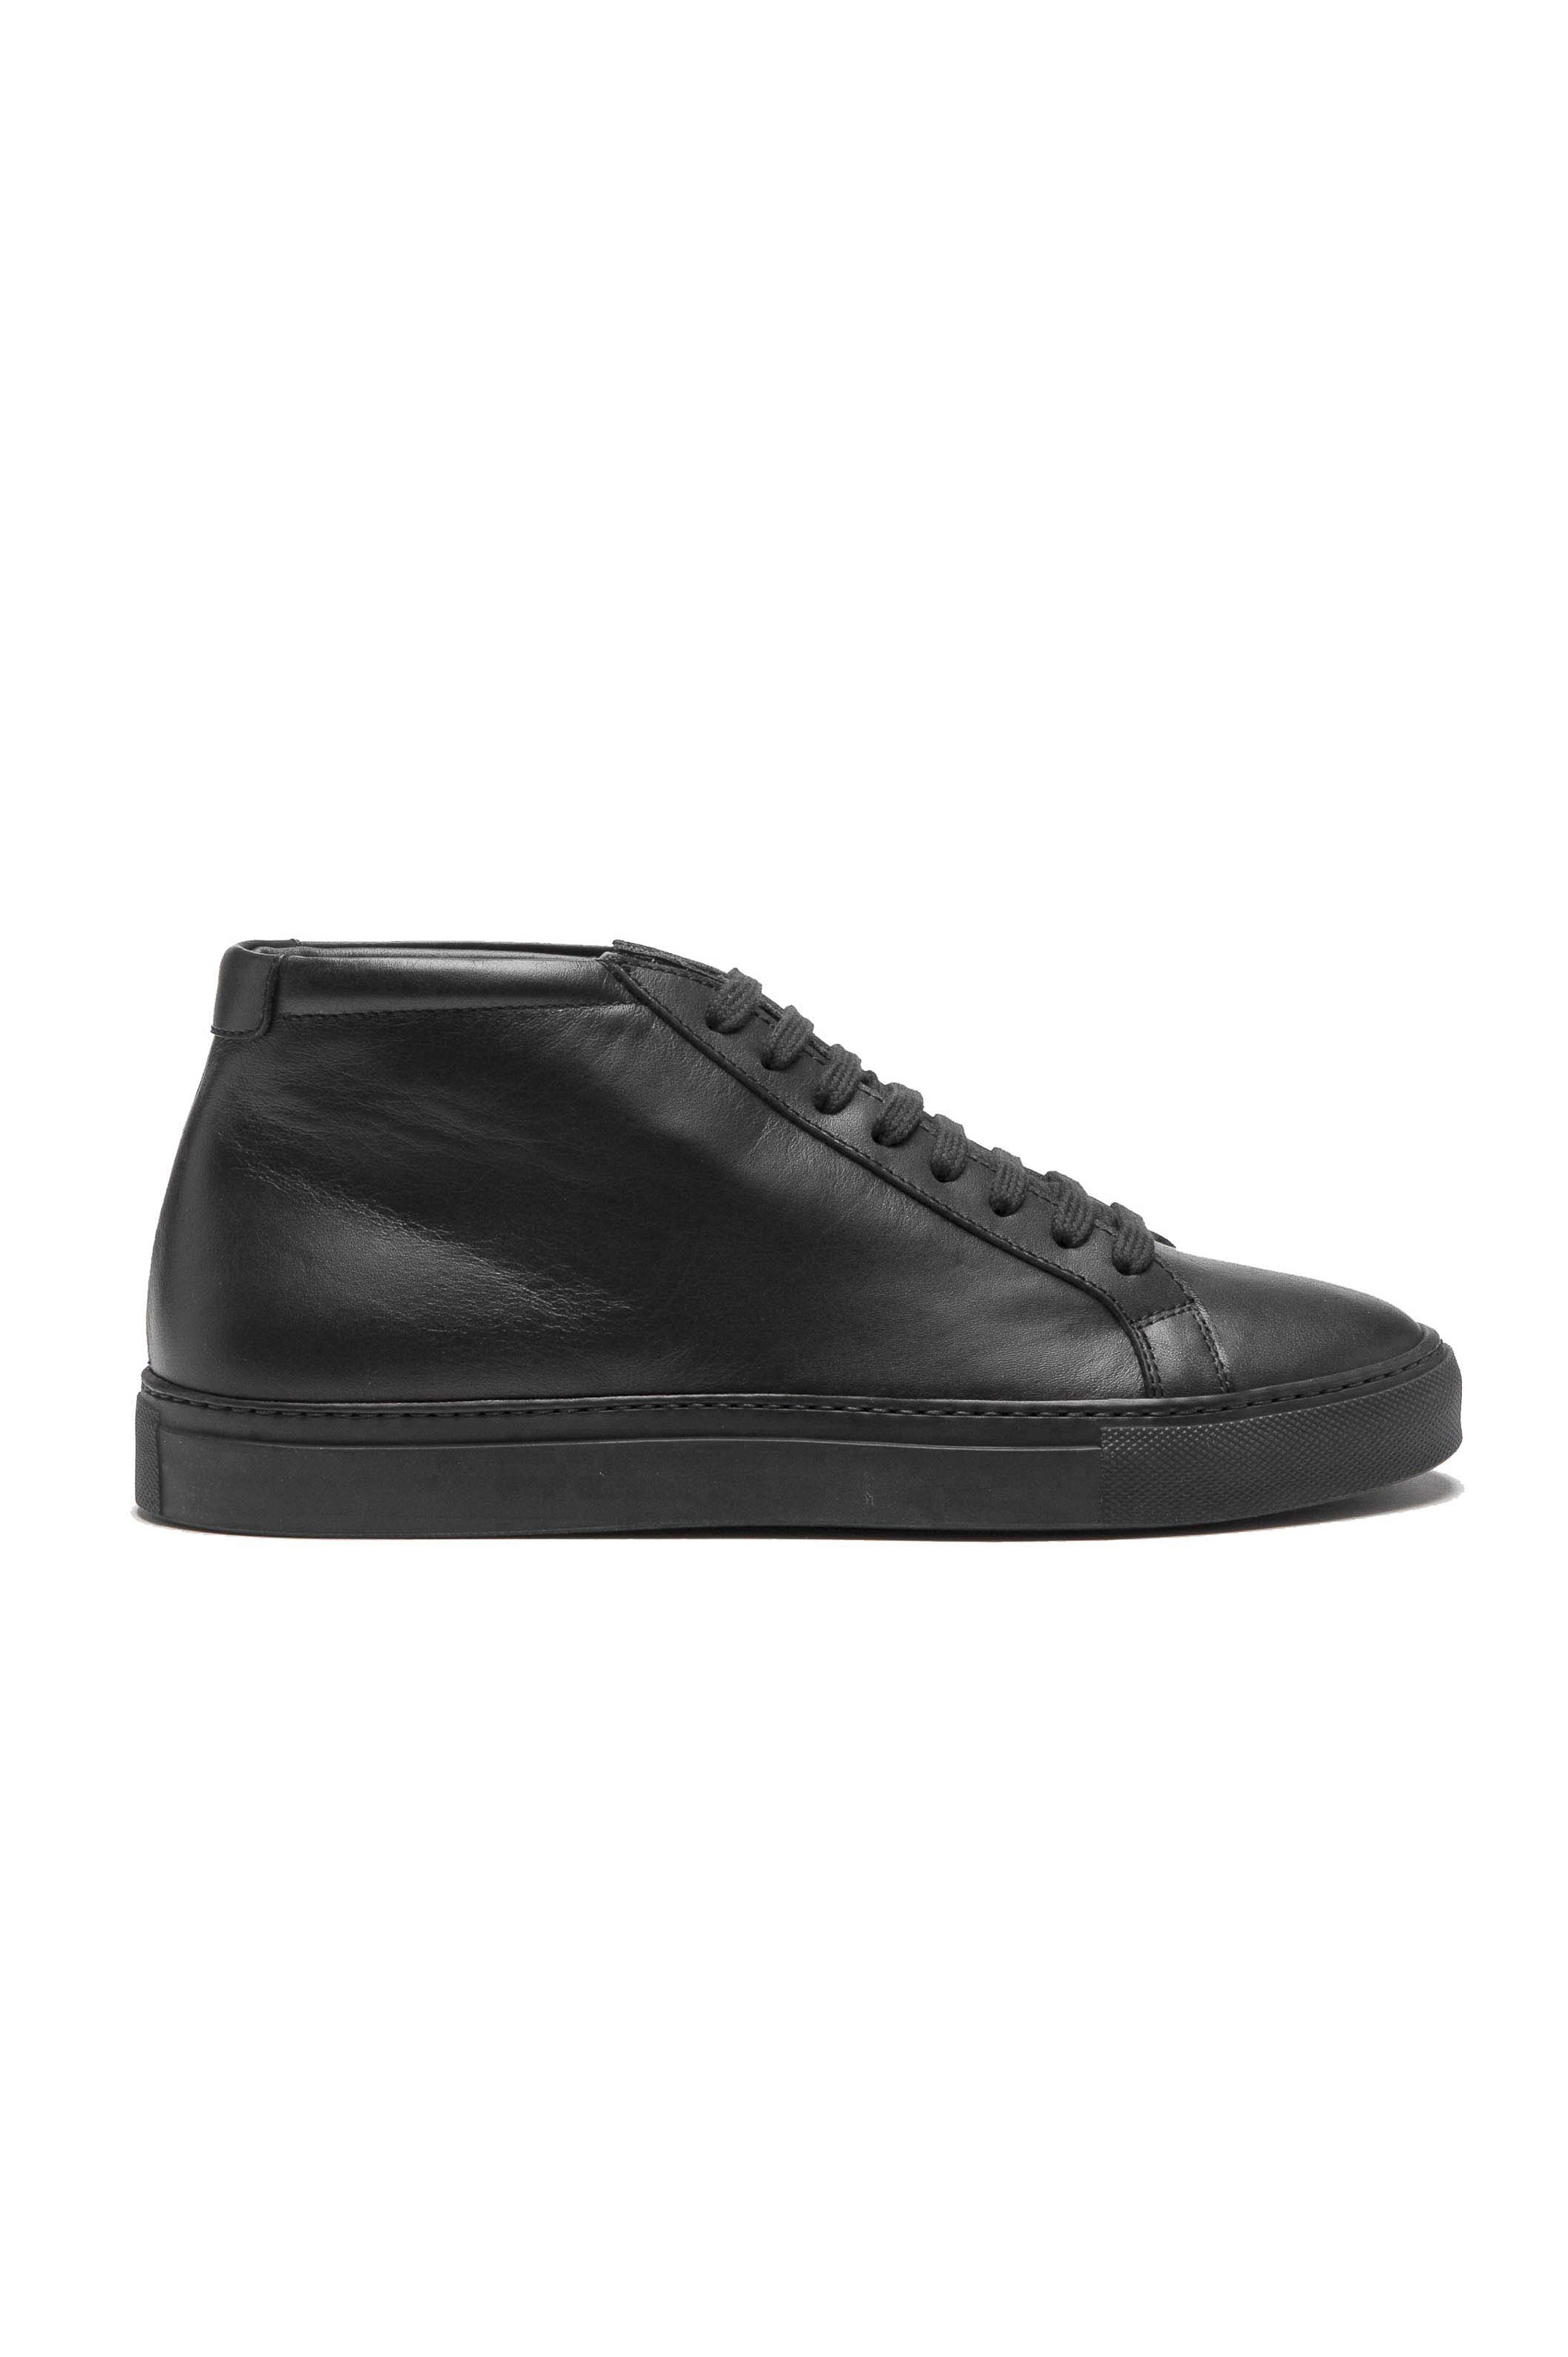 SBU 01524_2020SS Mid top lace up sneakers in black calfskin leather 01